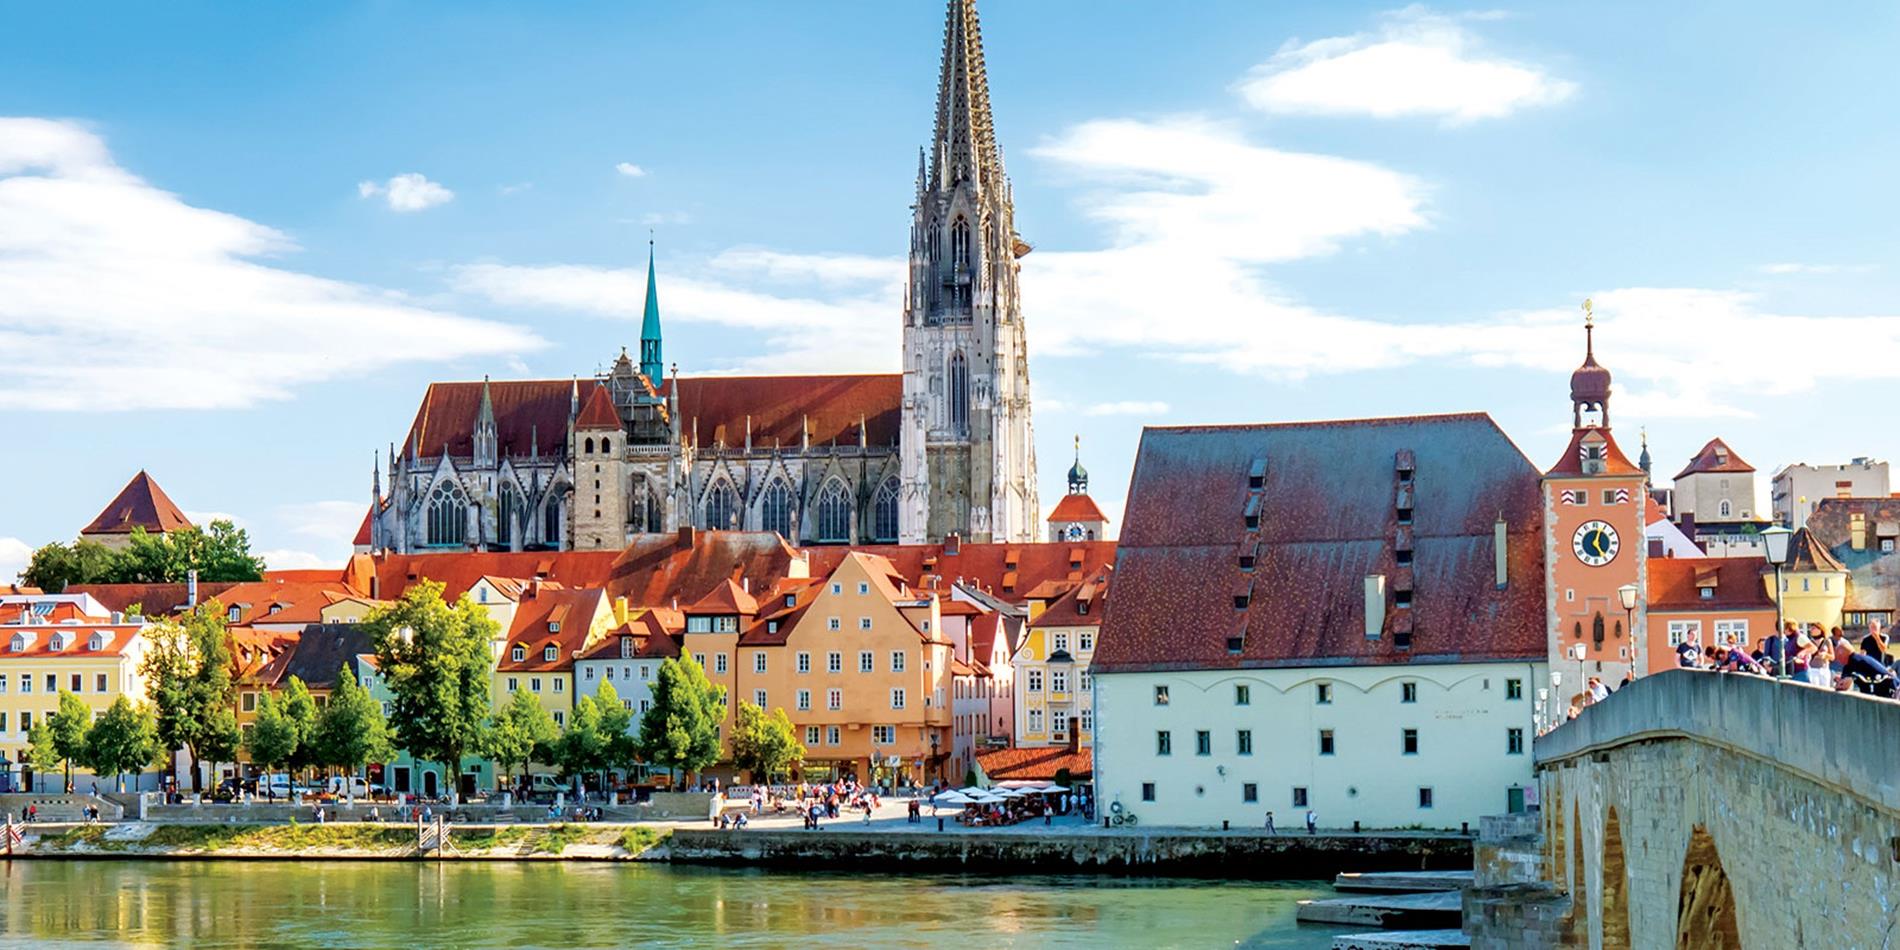 Historic old buildings and church along river with stone bridge in Regensburg, Germany